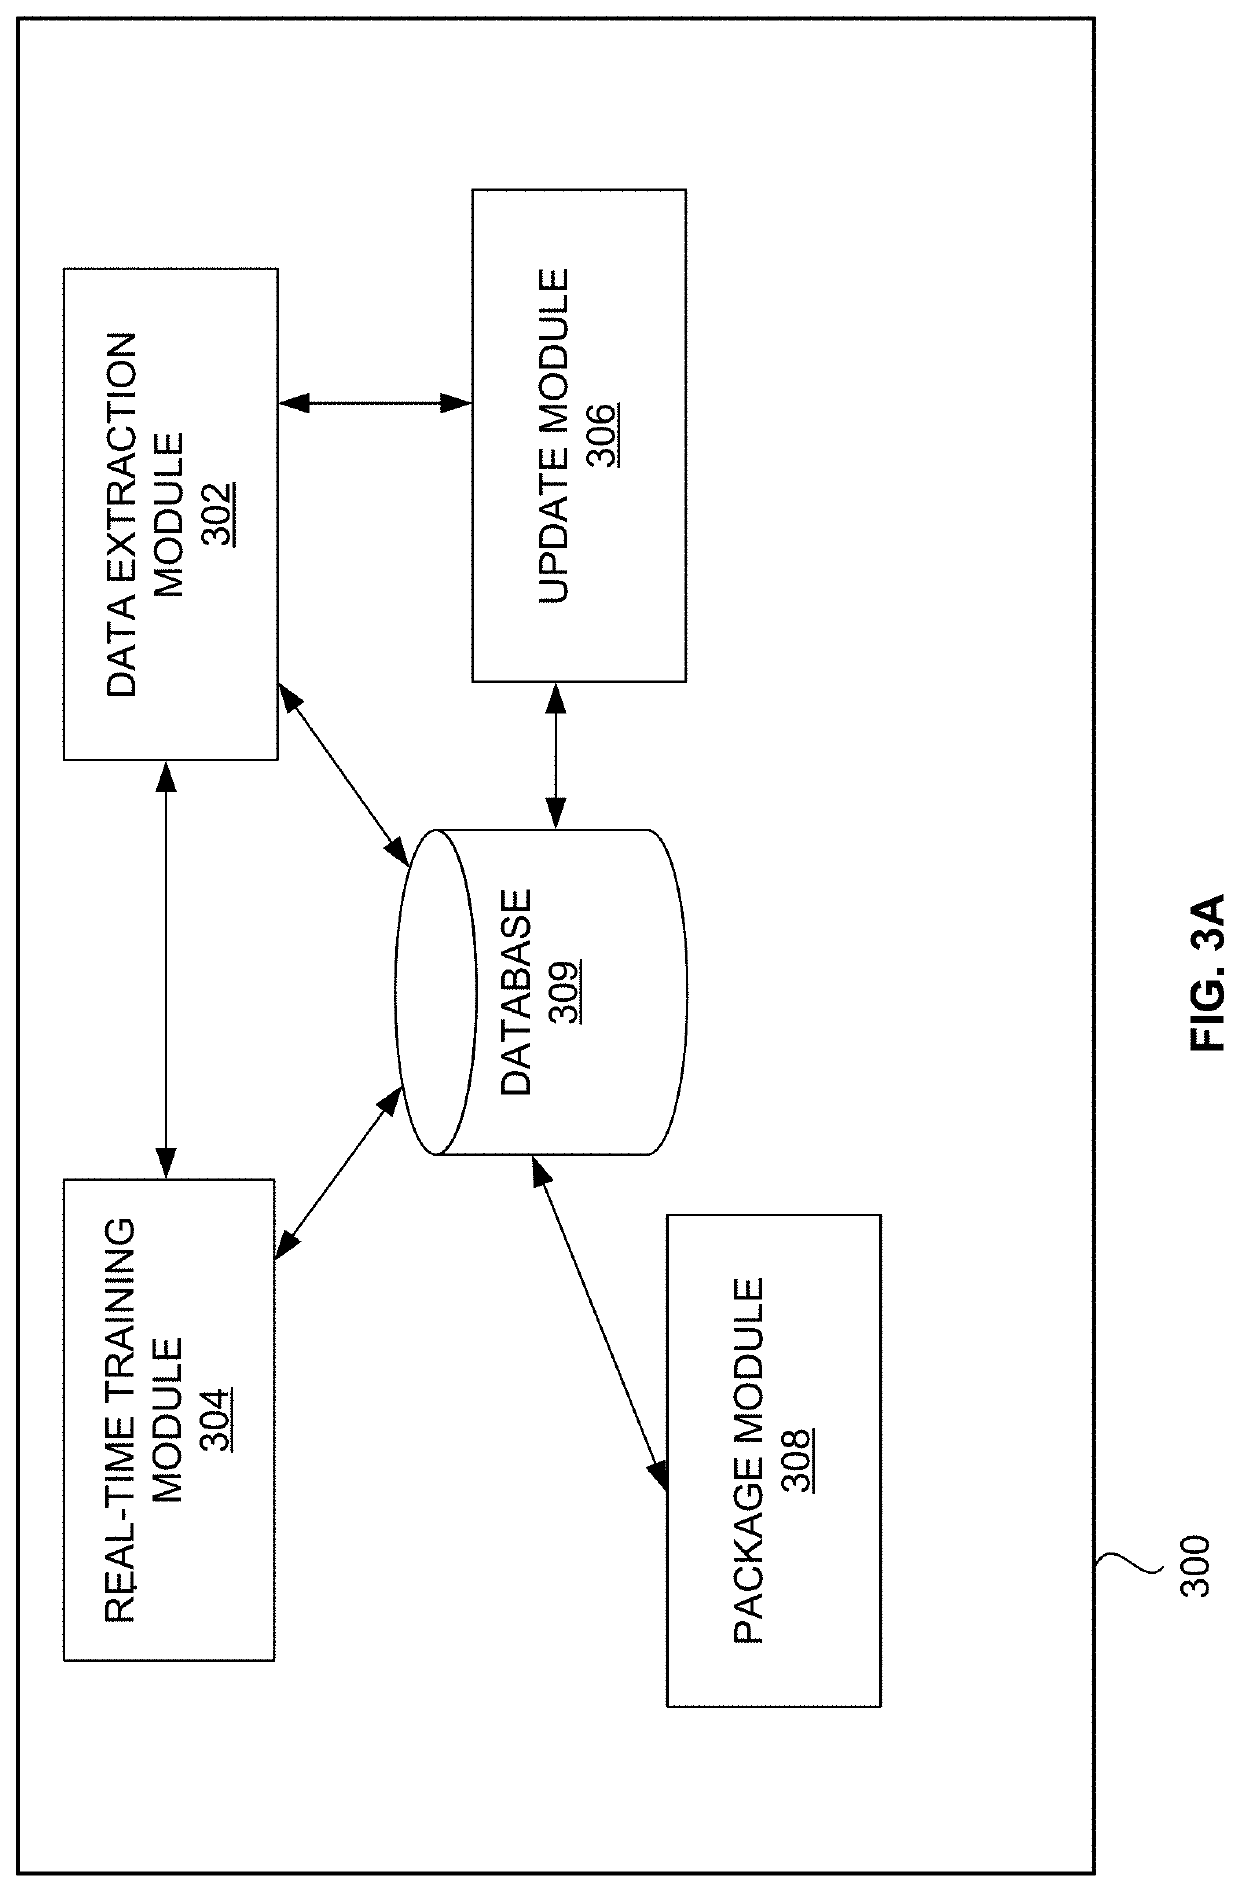 System and method for maintaining network integrity for incrementally training machine learning models at edge devices of a peer to peer network